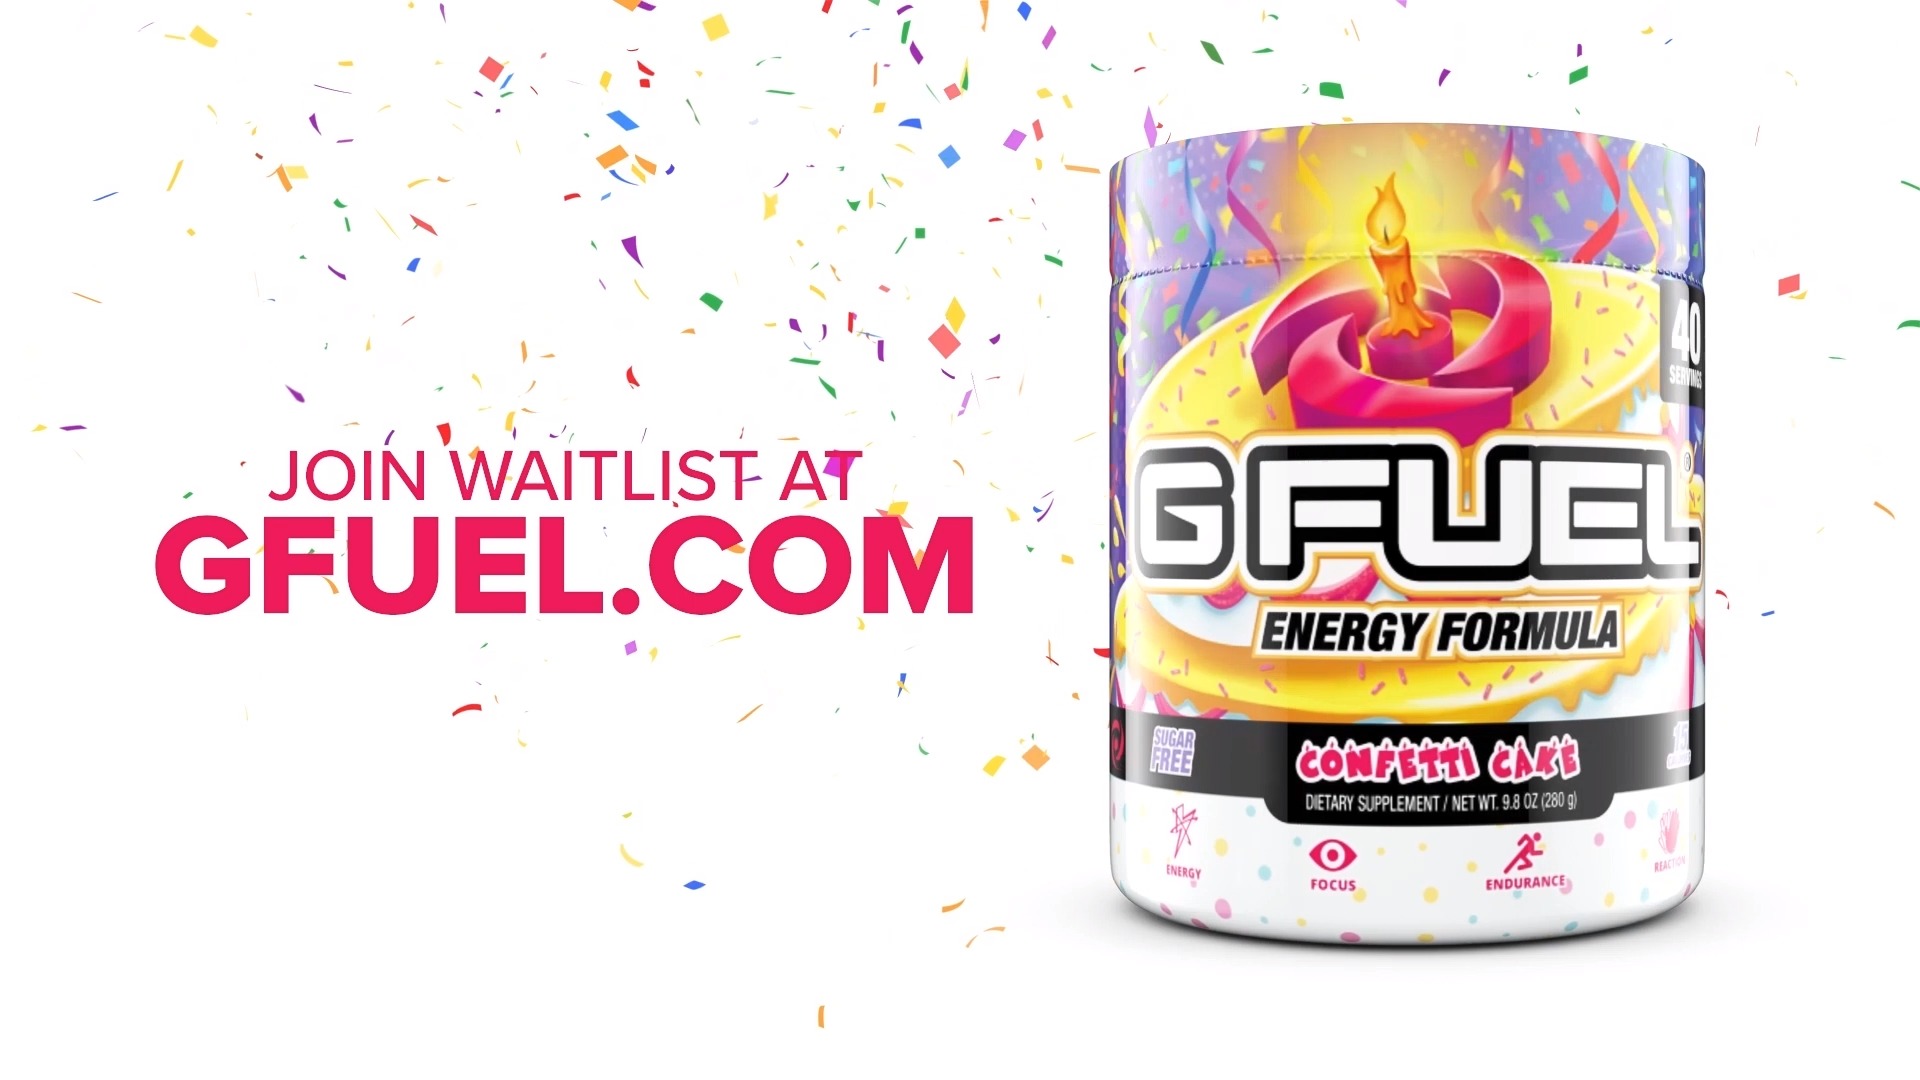 G FUEL® on Twitter: "🎂🥳 𝗚𝗜𝗩𝗘𝗔𝗪𝗔𝗬 + 𝗪𝗔𝗜𝗧𝗟𝗜𝗦𝗧 🥳🎂 To  celebrate 17 YEARS of @GammaLabs, we're launching a VERY SPECIAL "CONFETTI  CAKE" #GFUEL FLAVOR! Who wants a slice?! 😋 💖 "𝗟𝗜𝗞𝗘 +